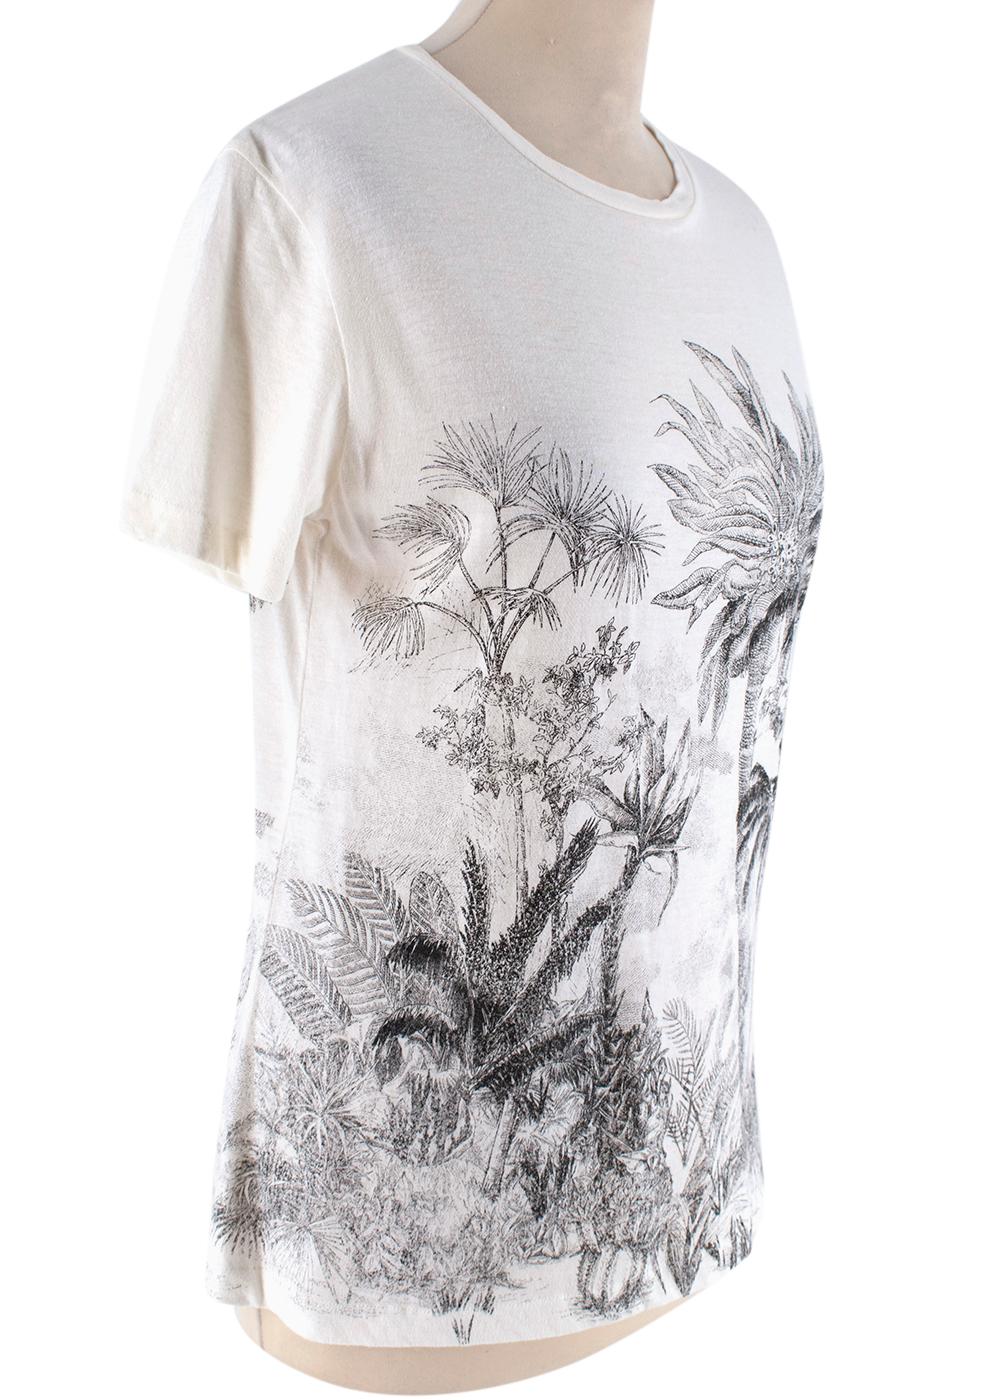 Dior White Cotton & Linen T-Shirt with Navy Blue Toile de Jouy Tropicalia

- Faded printed palm tree design
- Adorned with the House's iconic Toile de Jouy motif
- An effortless staple
- Bumble bee with CD logo on the neck
the tropical print